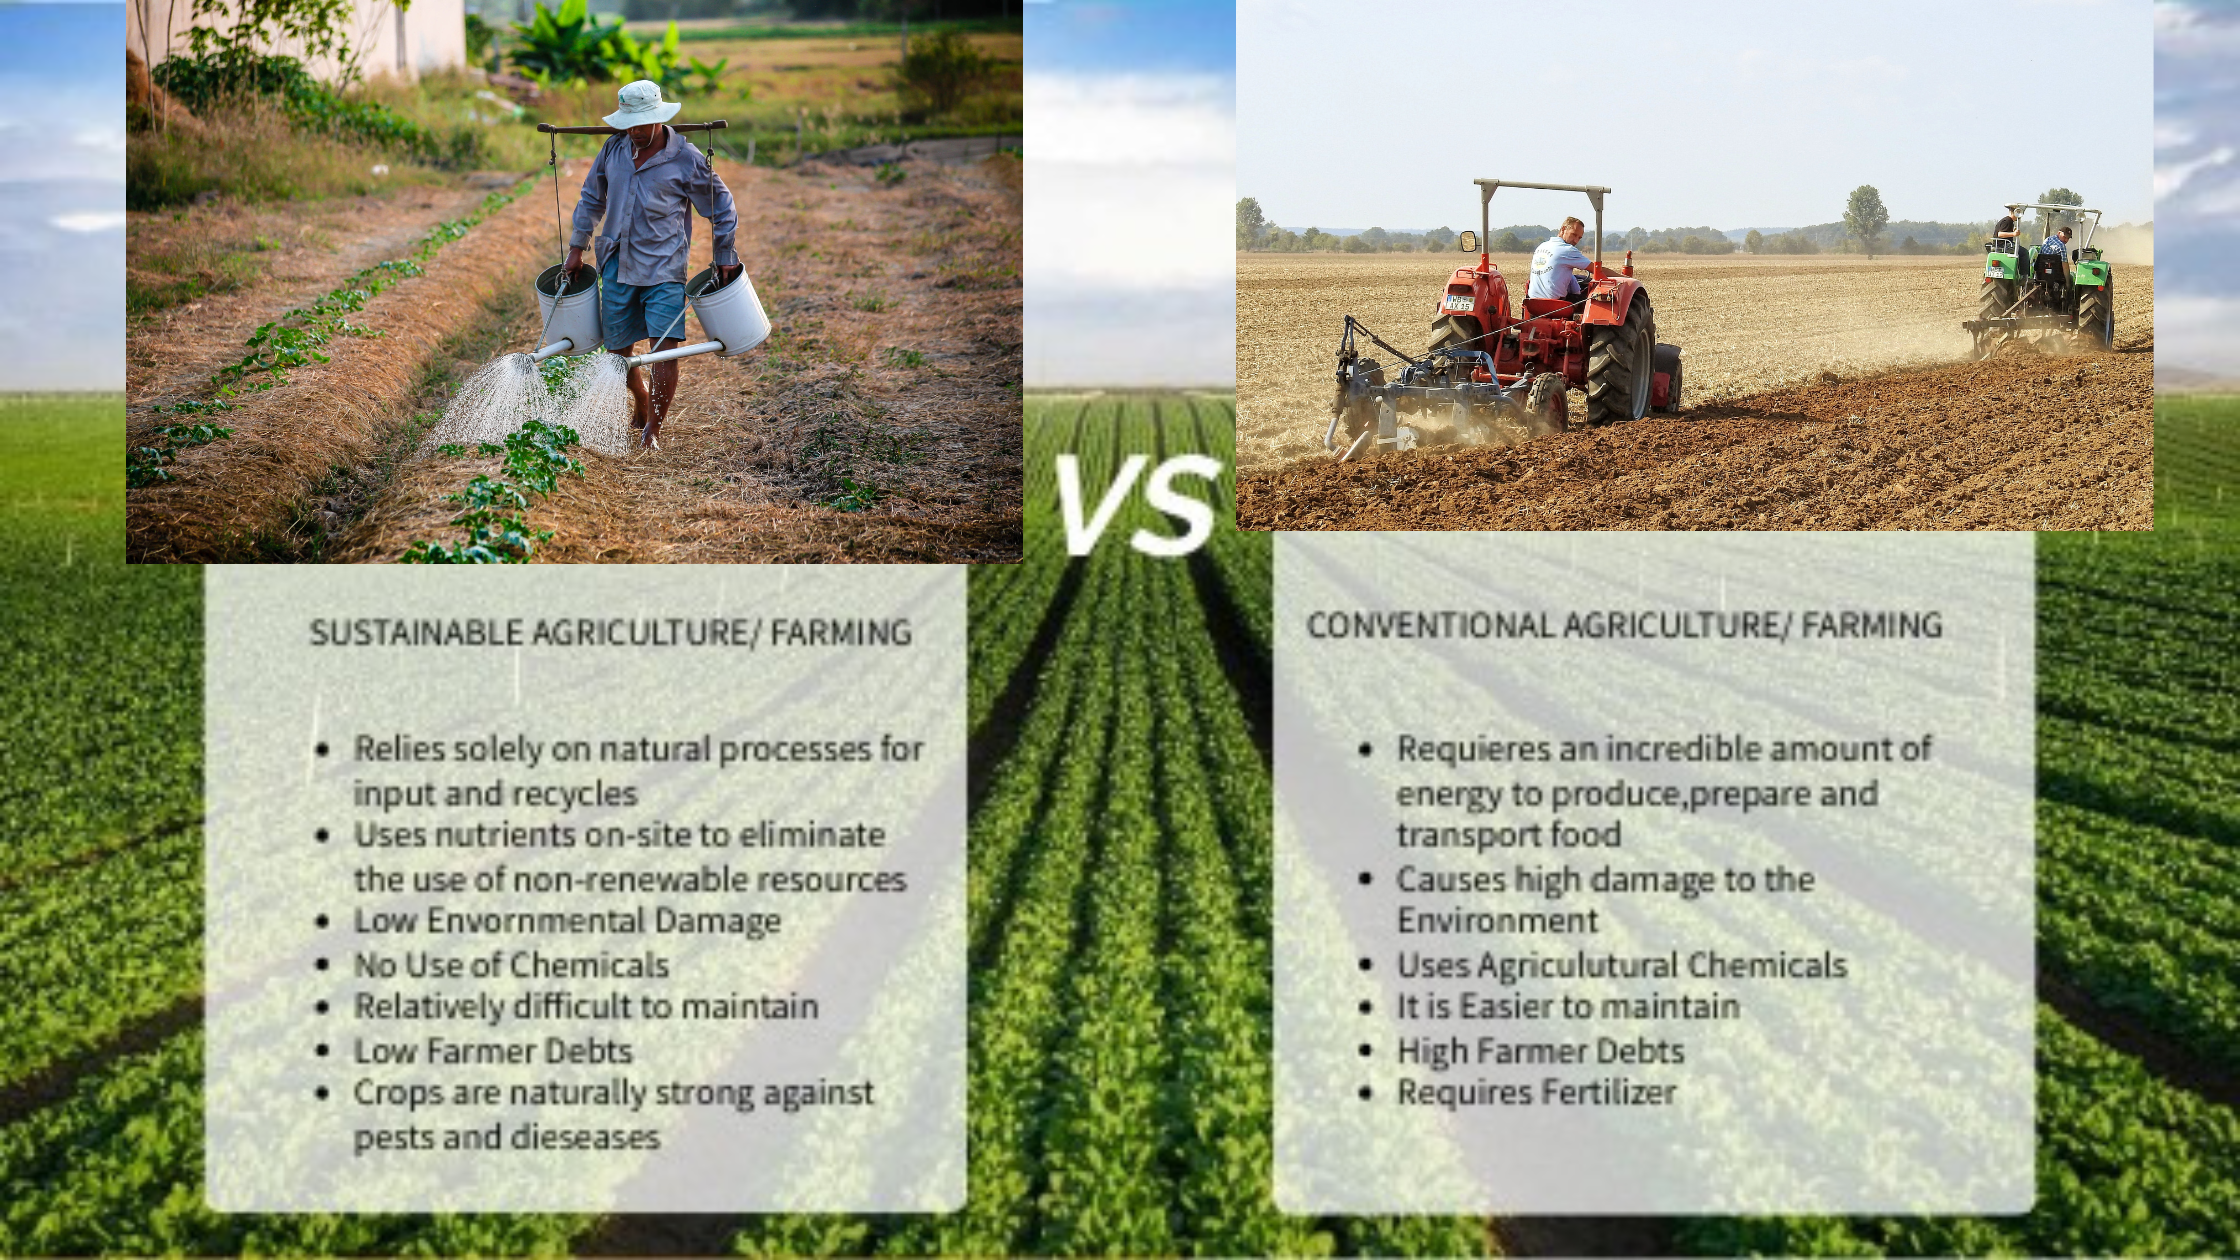 Sustainable Agriculture Differ from Conventional Agriculture